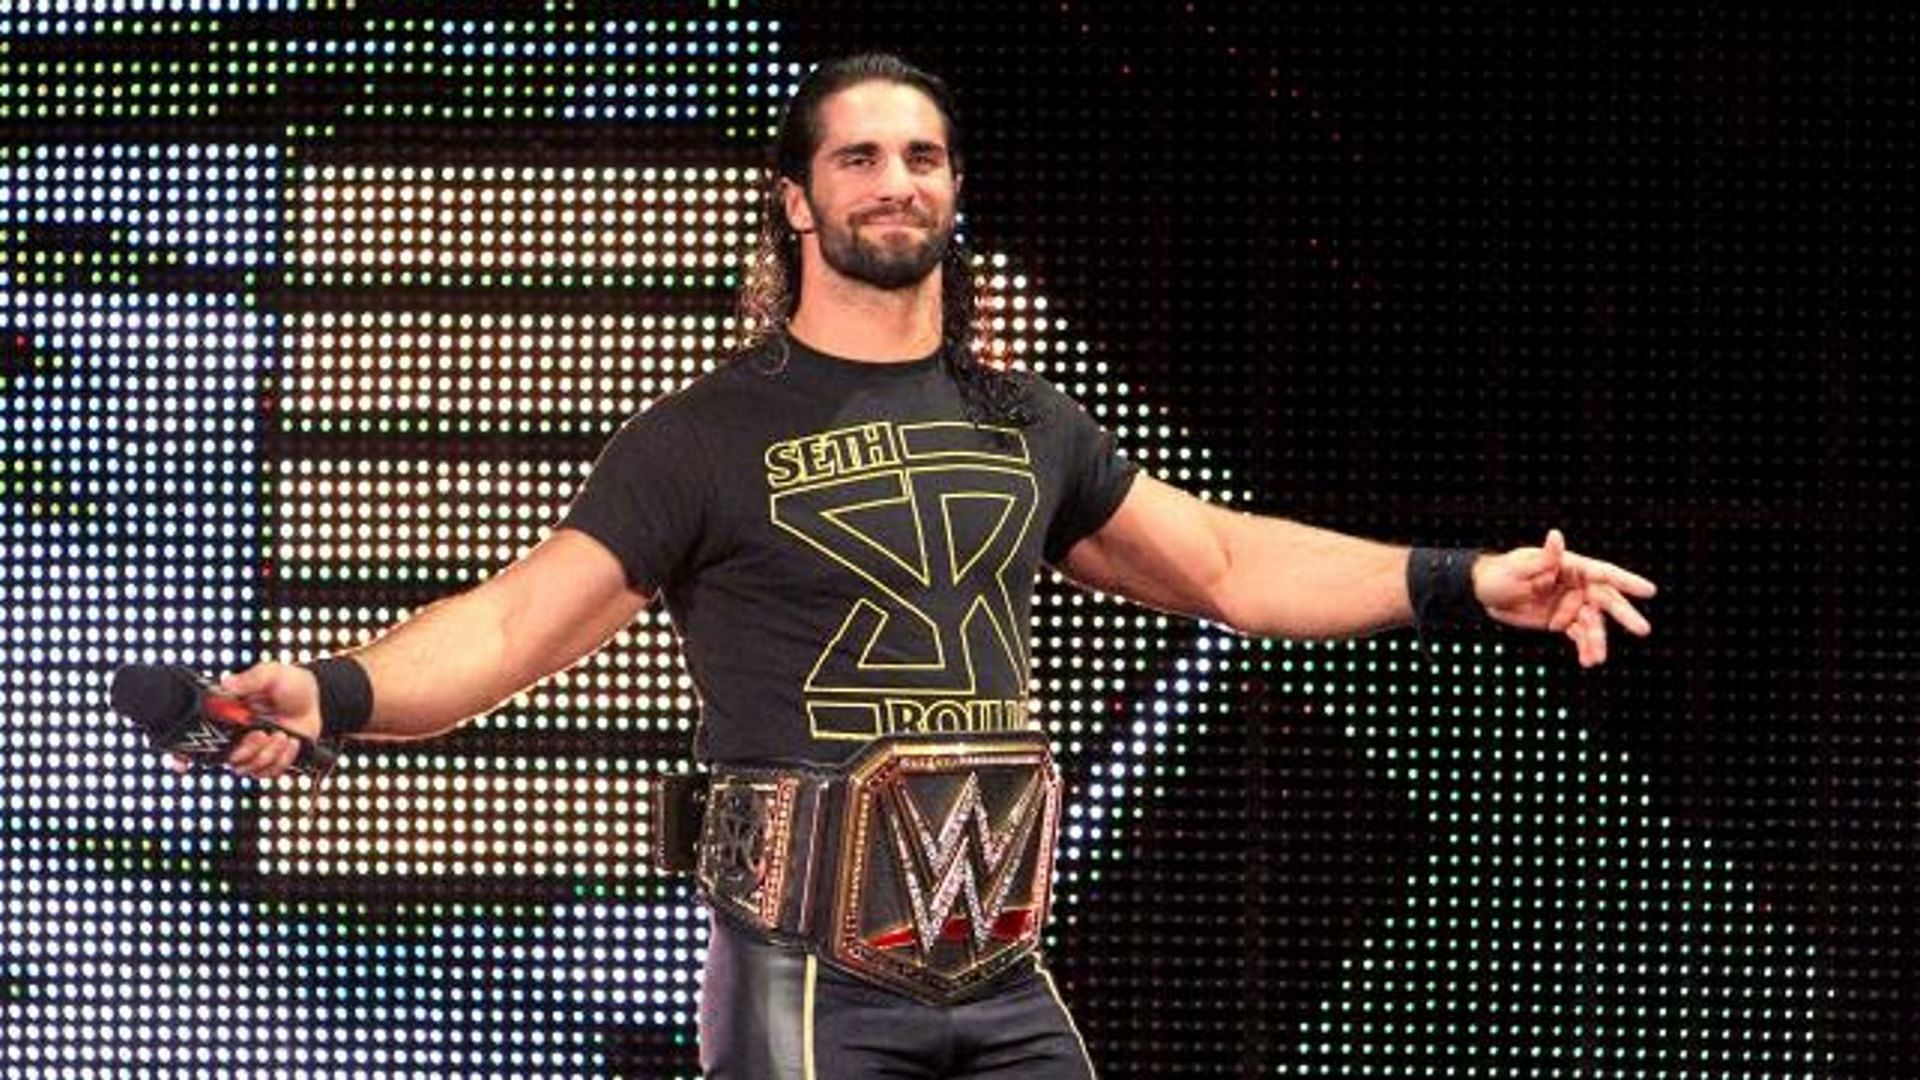 Seth was once a member of a group similar to the nWo, The Shield.